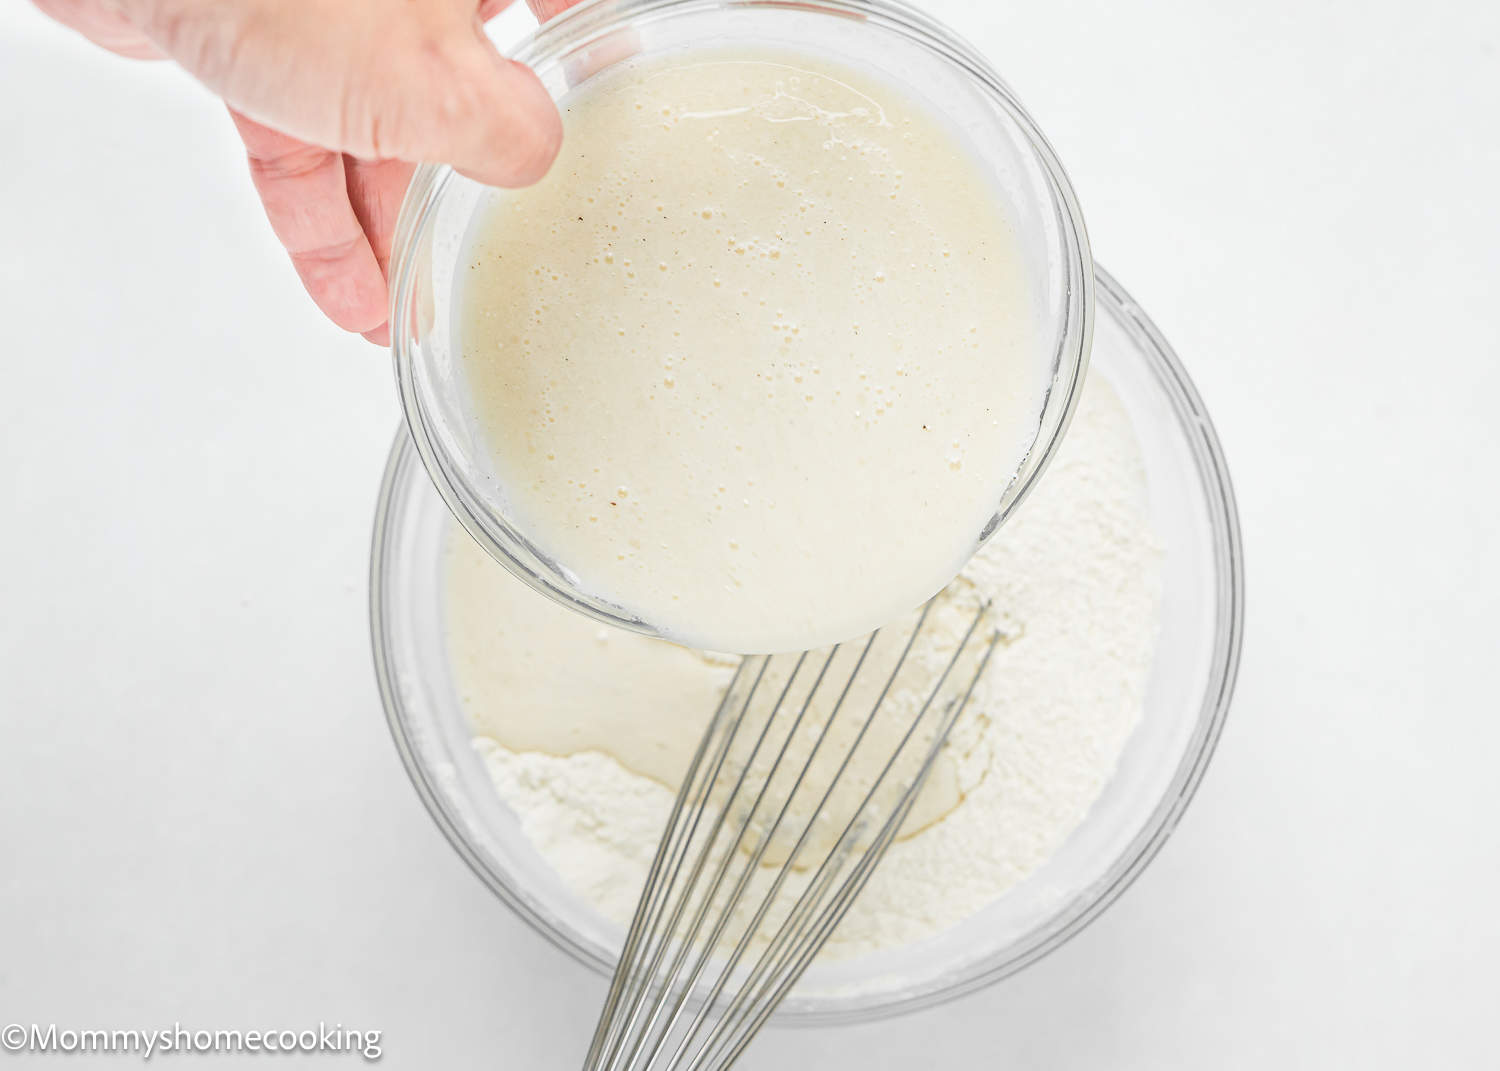 a hand mixing ingredients to make dairy free egg-free Vanilla Cupcakes batter.